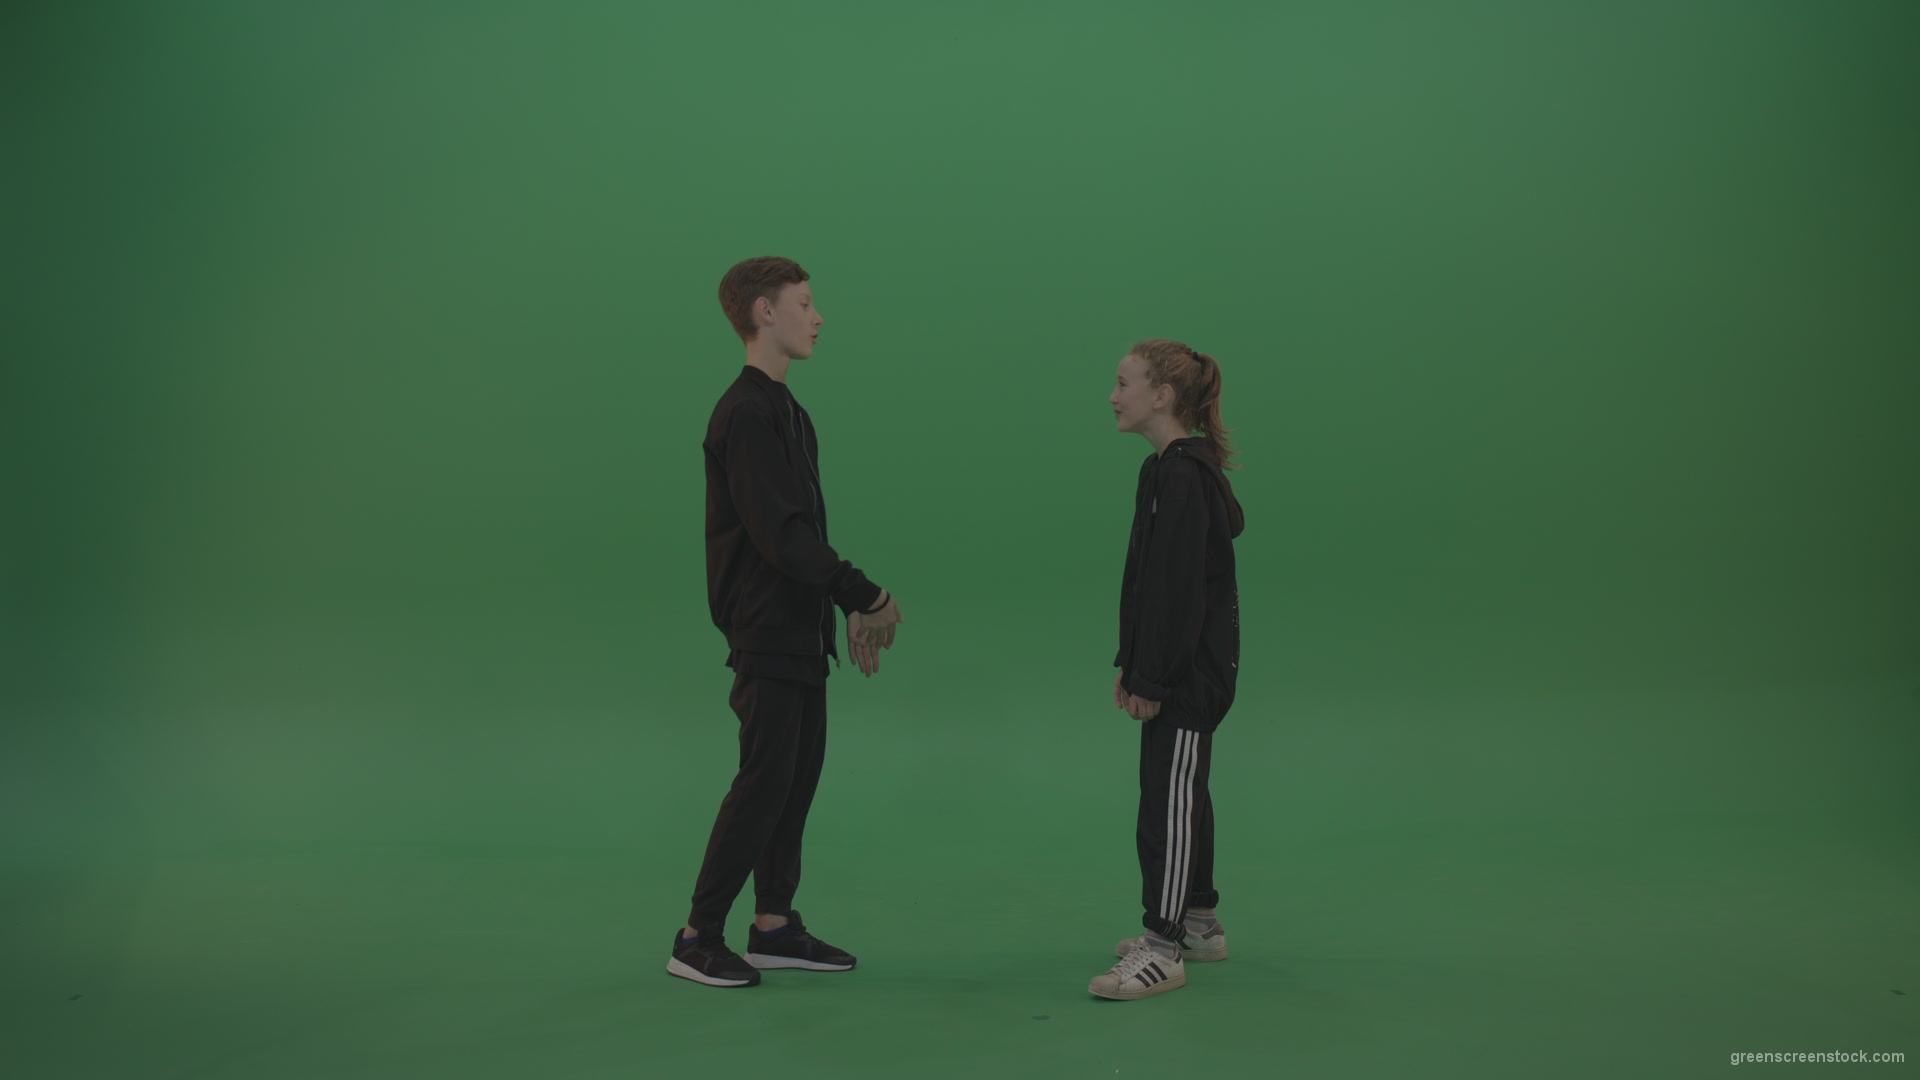 Boy-in-black-wear-talks-to-girl-over-chromakey-background_004 Green Screen Stock